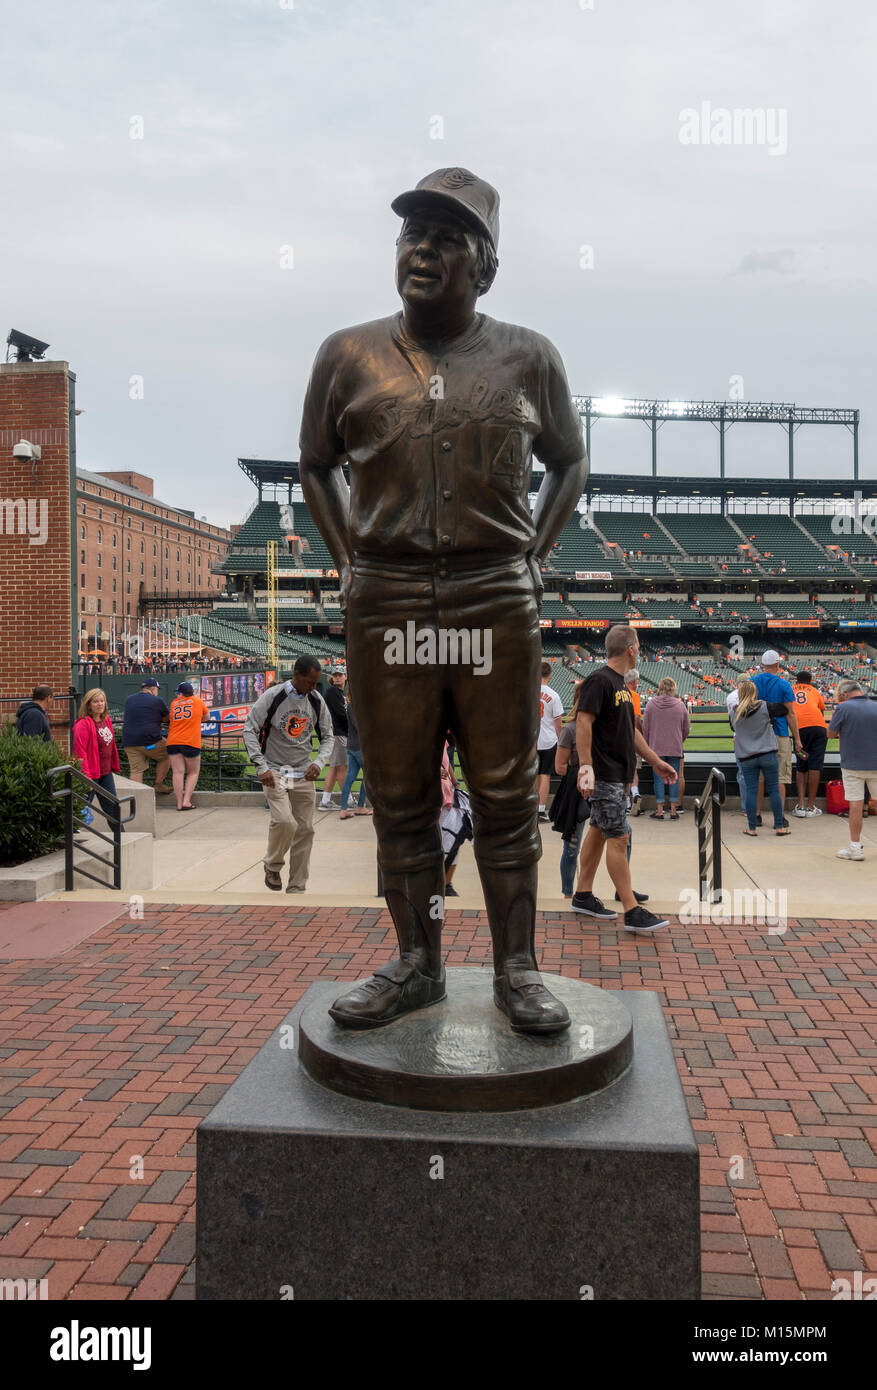 Hall of Famer sculpture of Earl Weaver at Oriole Park at Camden Yards, home to the Baltimore Orioles MLB team, Baltimore, Maryland, USA. Stock Photo